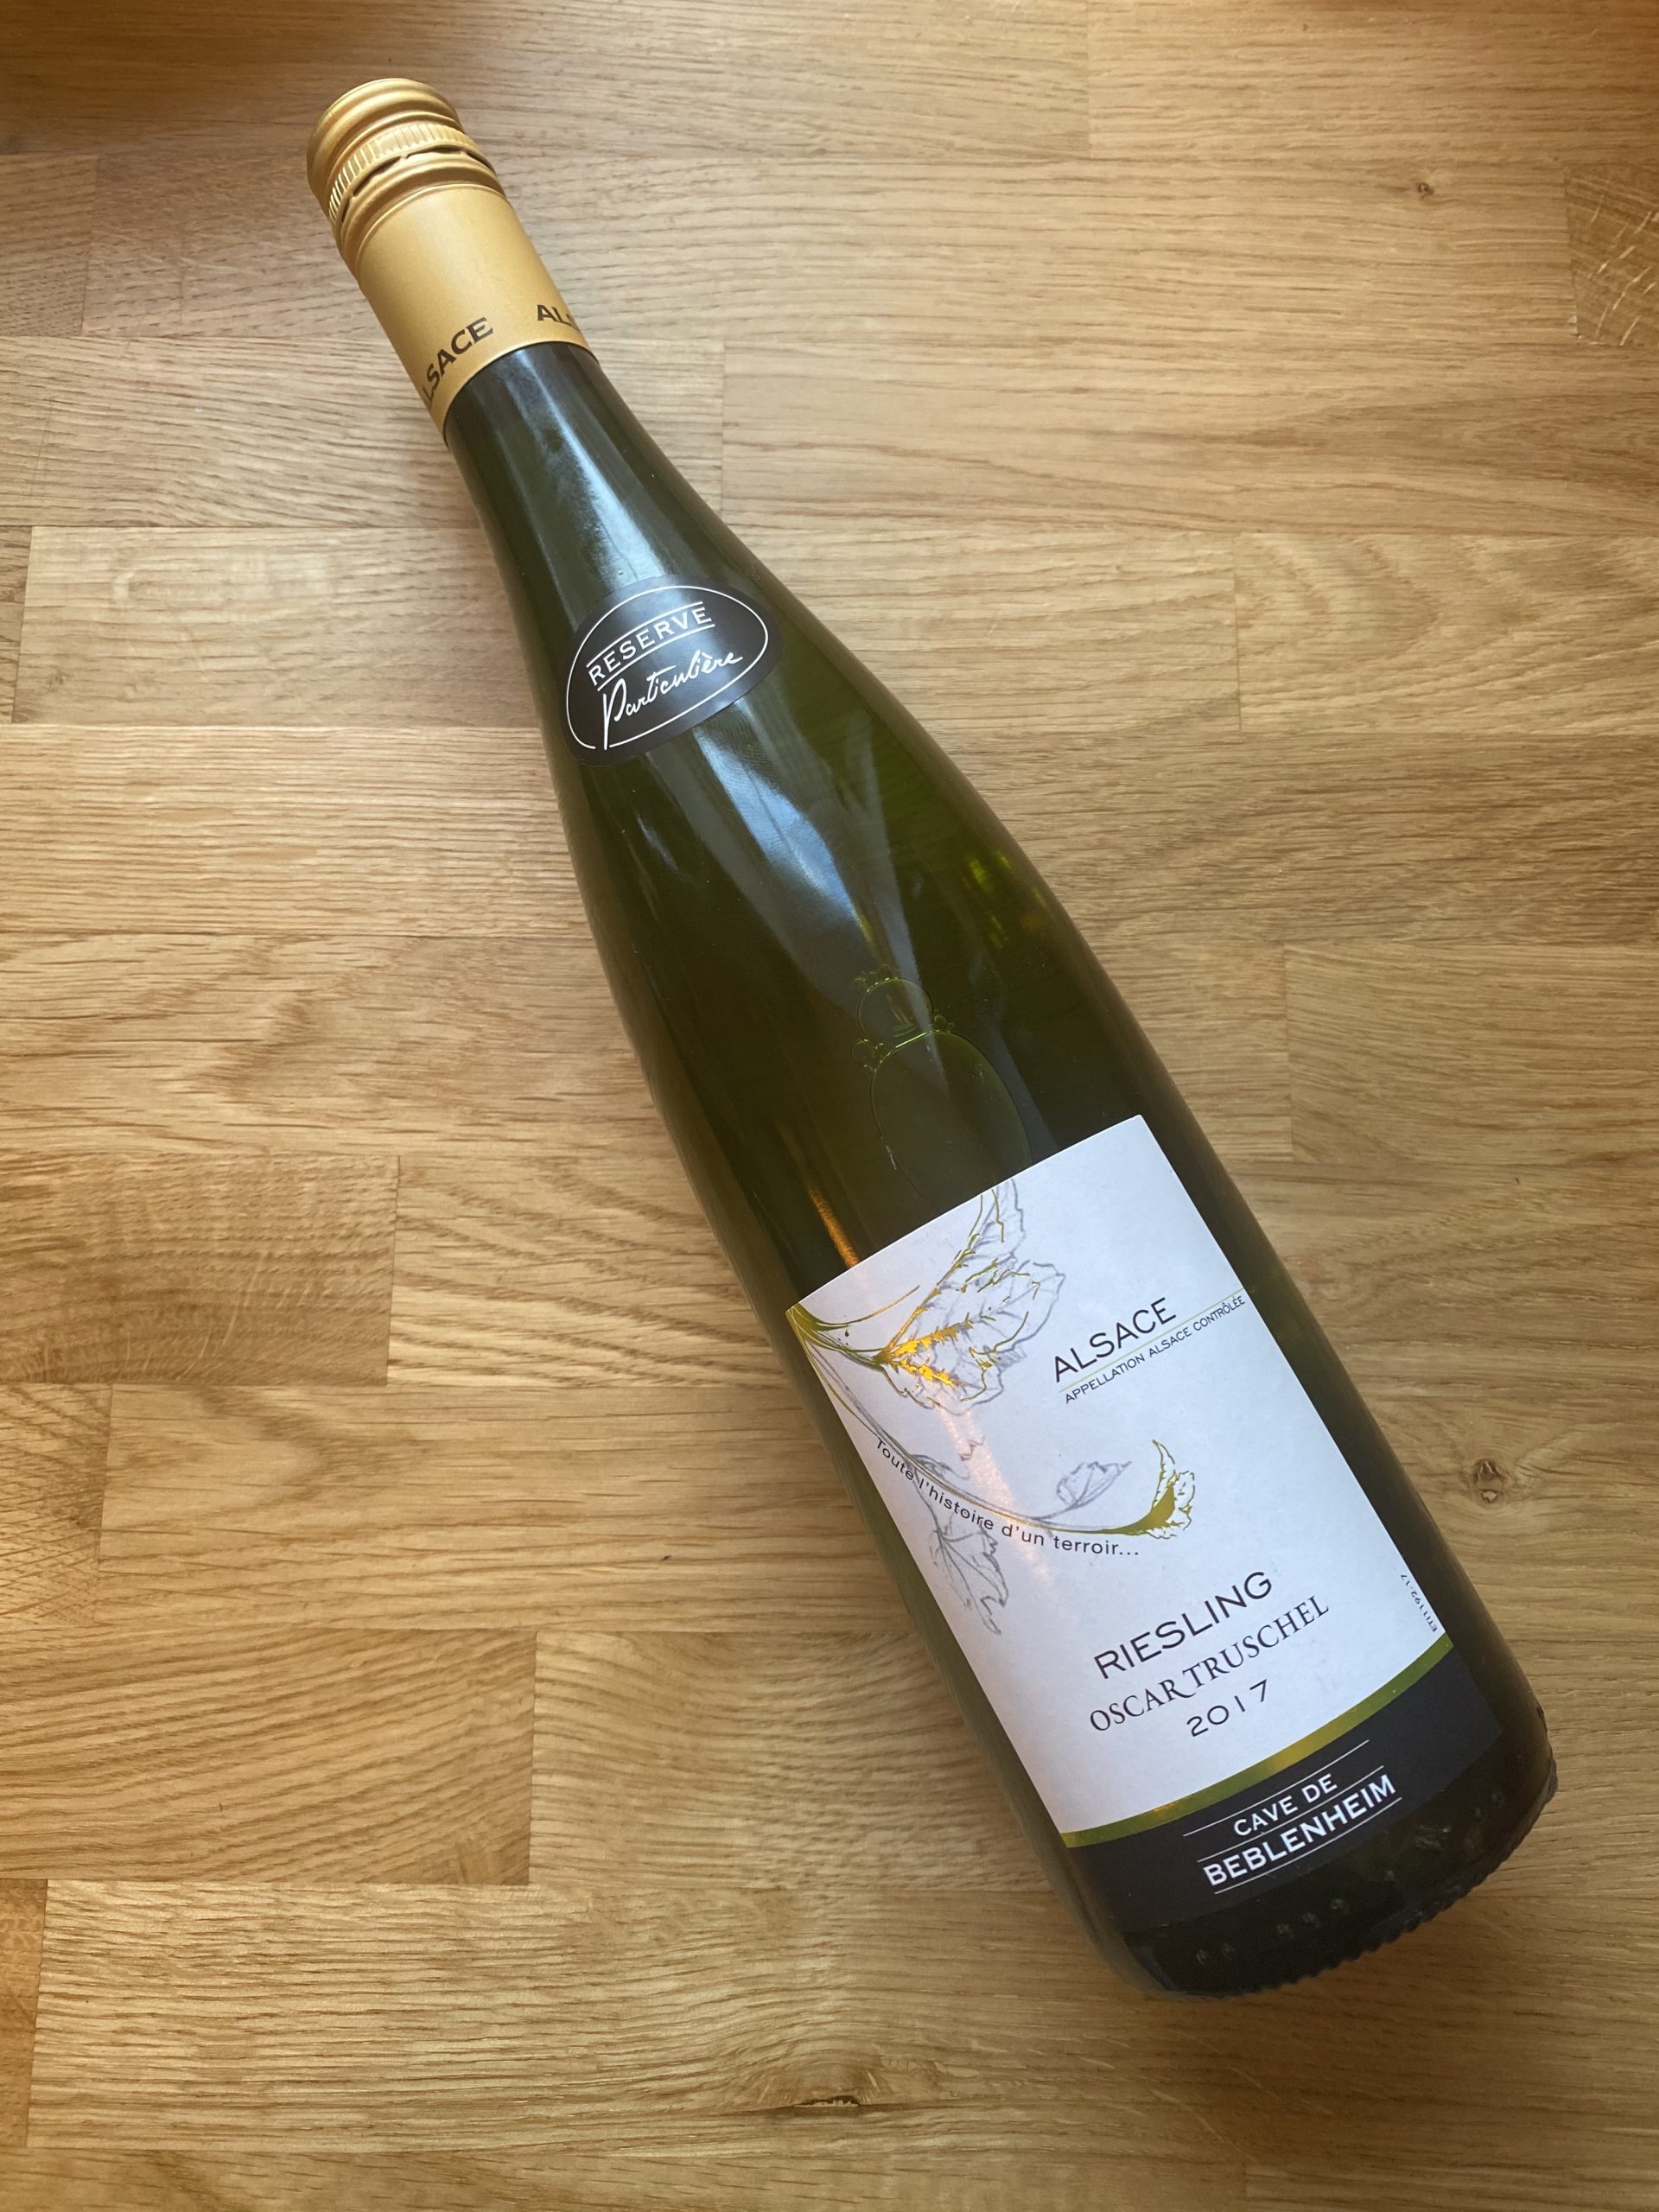 https://wpcluster.dctdigital.com/thecourier/wp-content/uploads/sites/12/2020/05/Alsace-riesling-oscar-truschell-scaled.jpeg